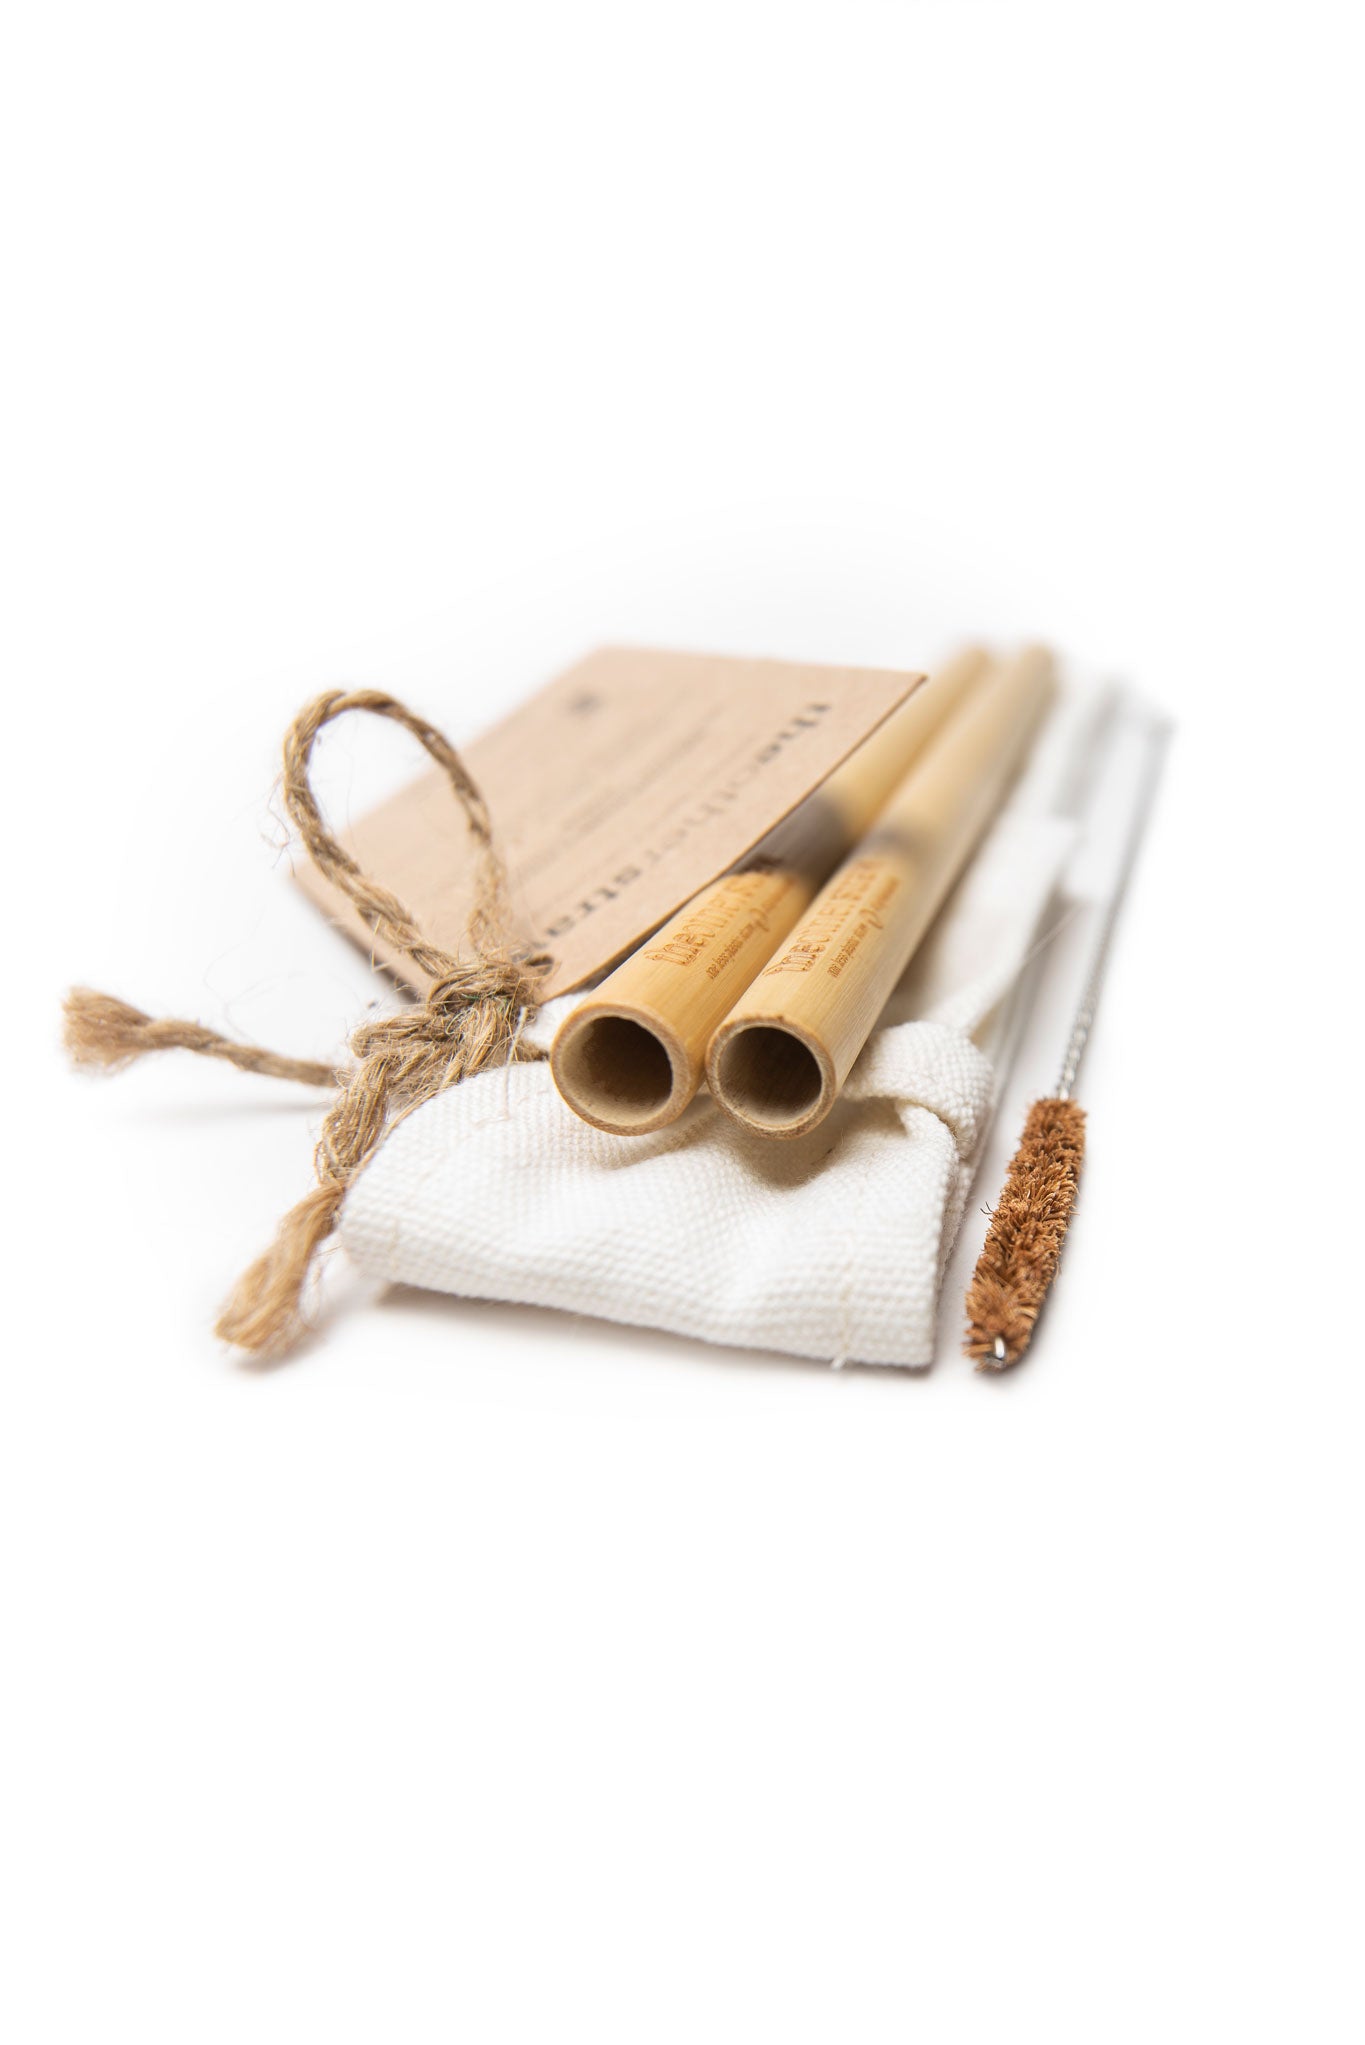 2 smoothie bamboo straws on cotton pouch with coconut fibre cleaning brush